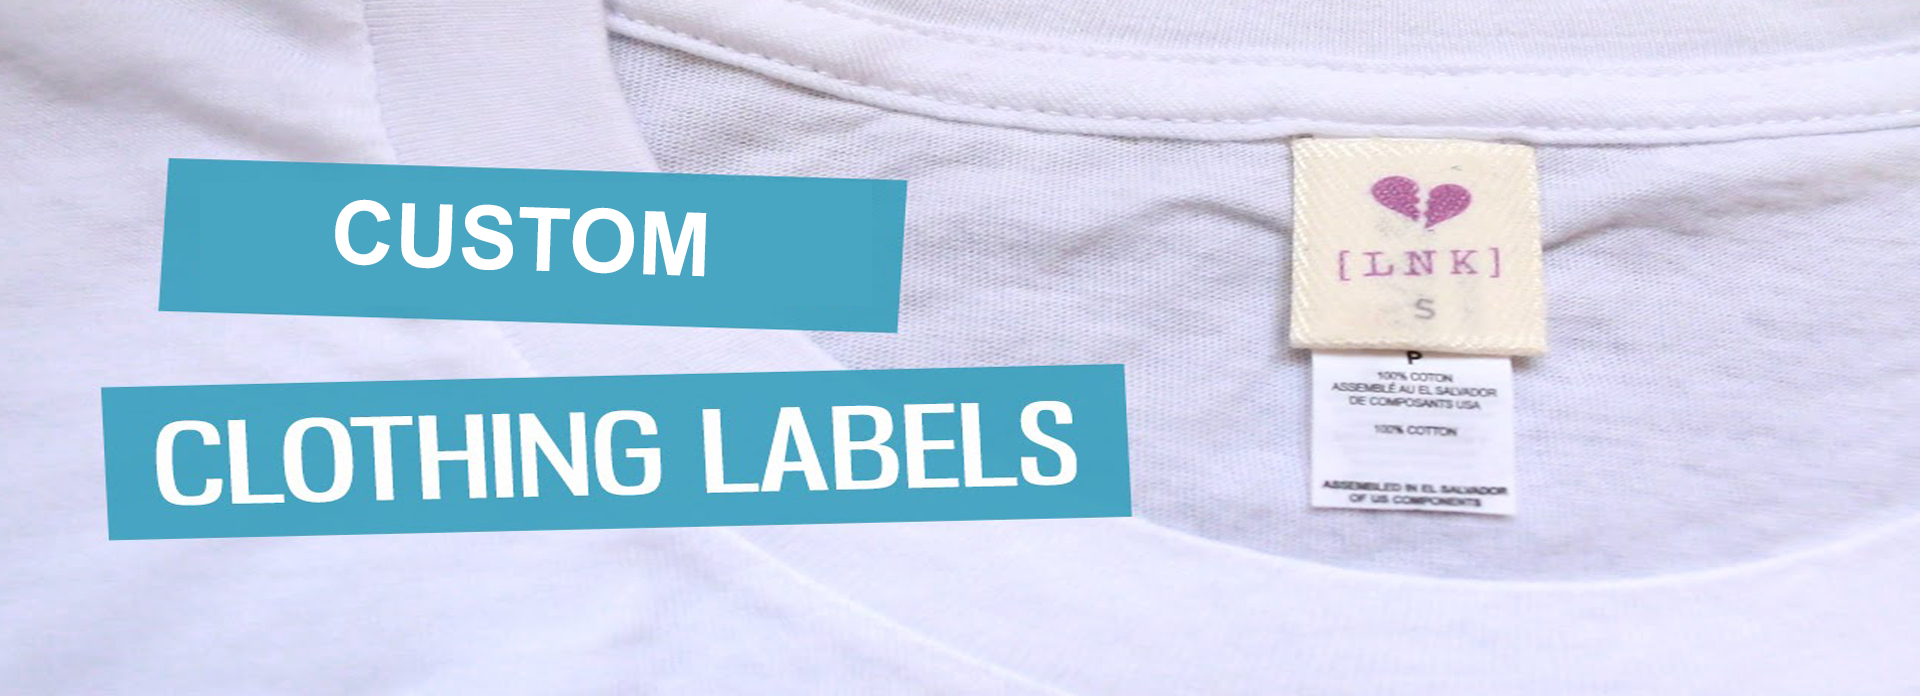 Computerized Woven Clothing Labels | Printed Label Manufacturers